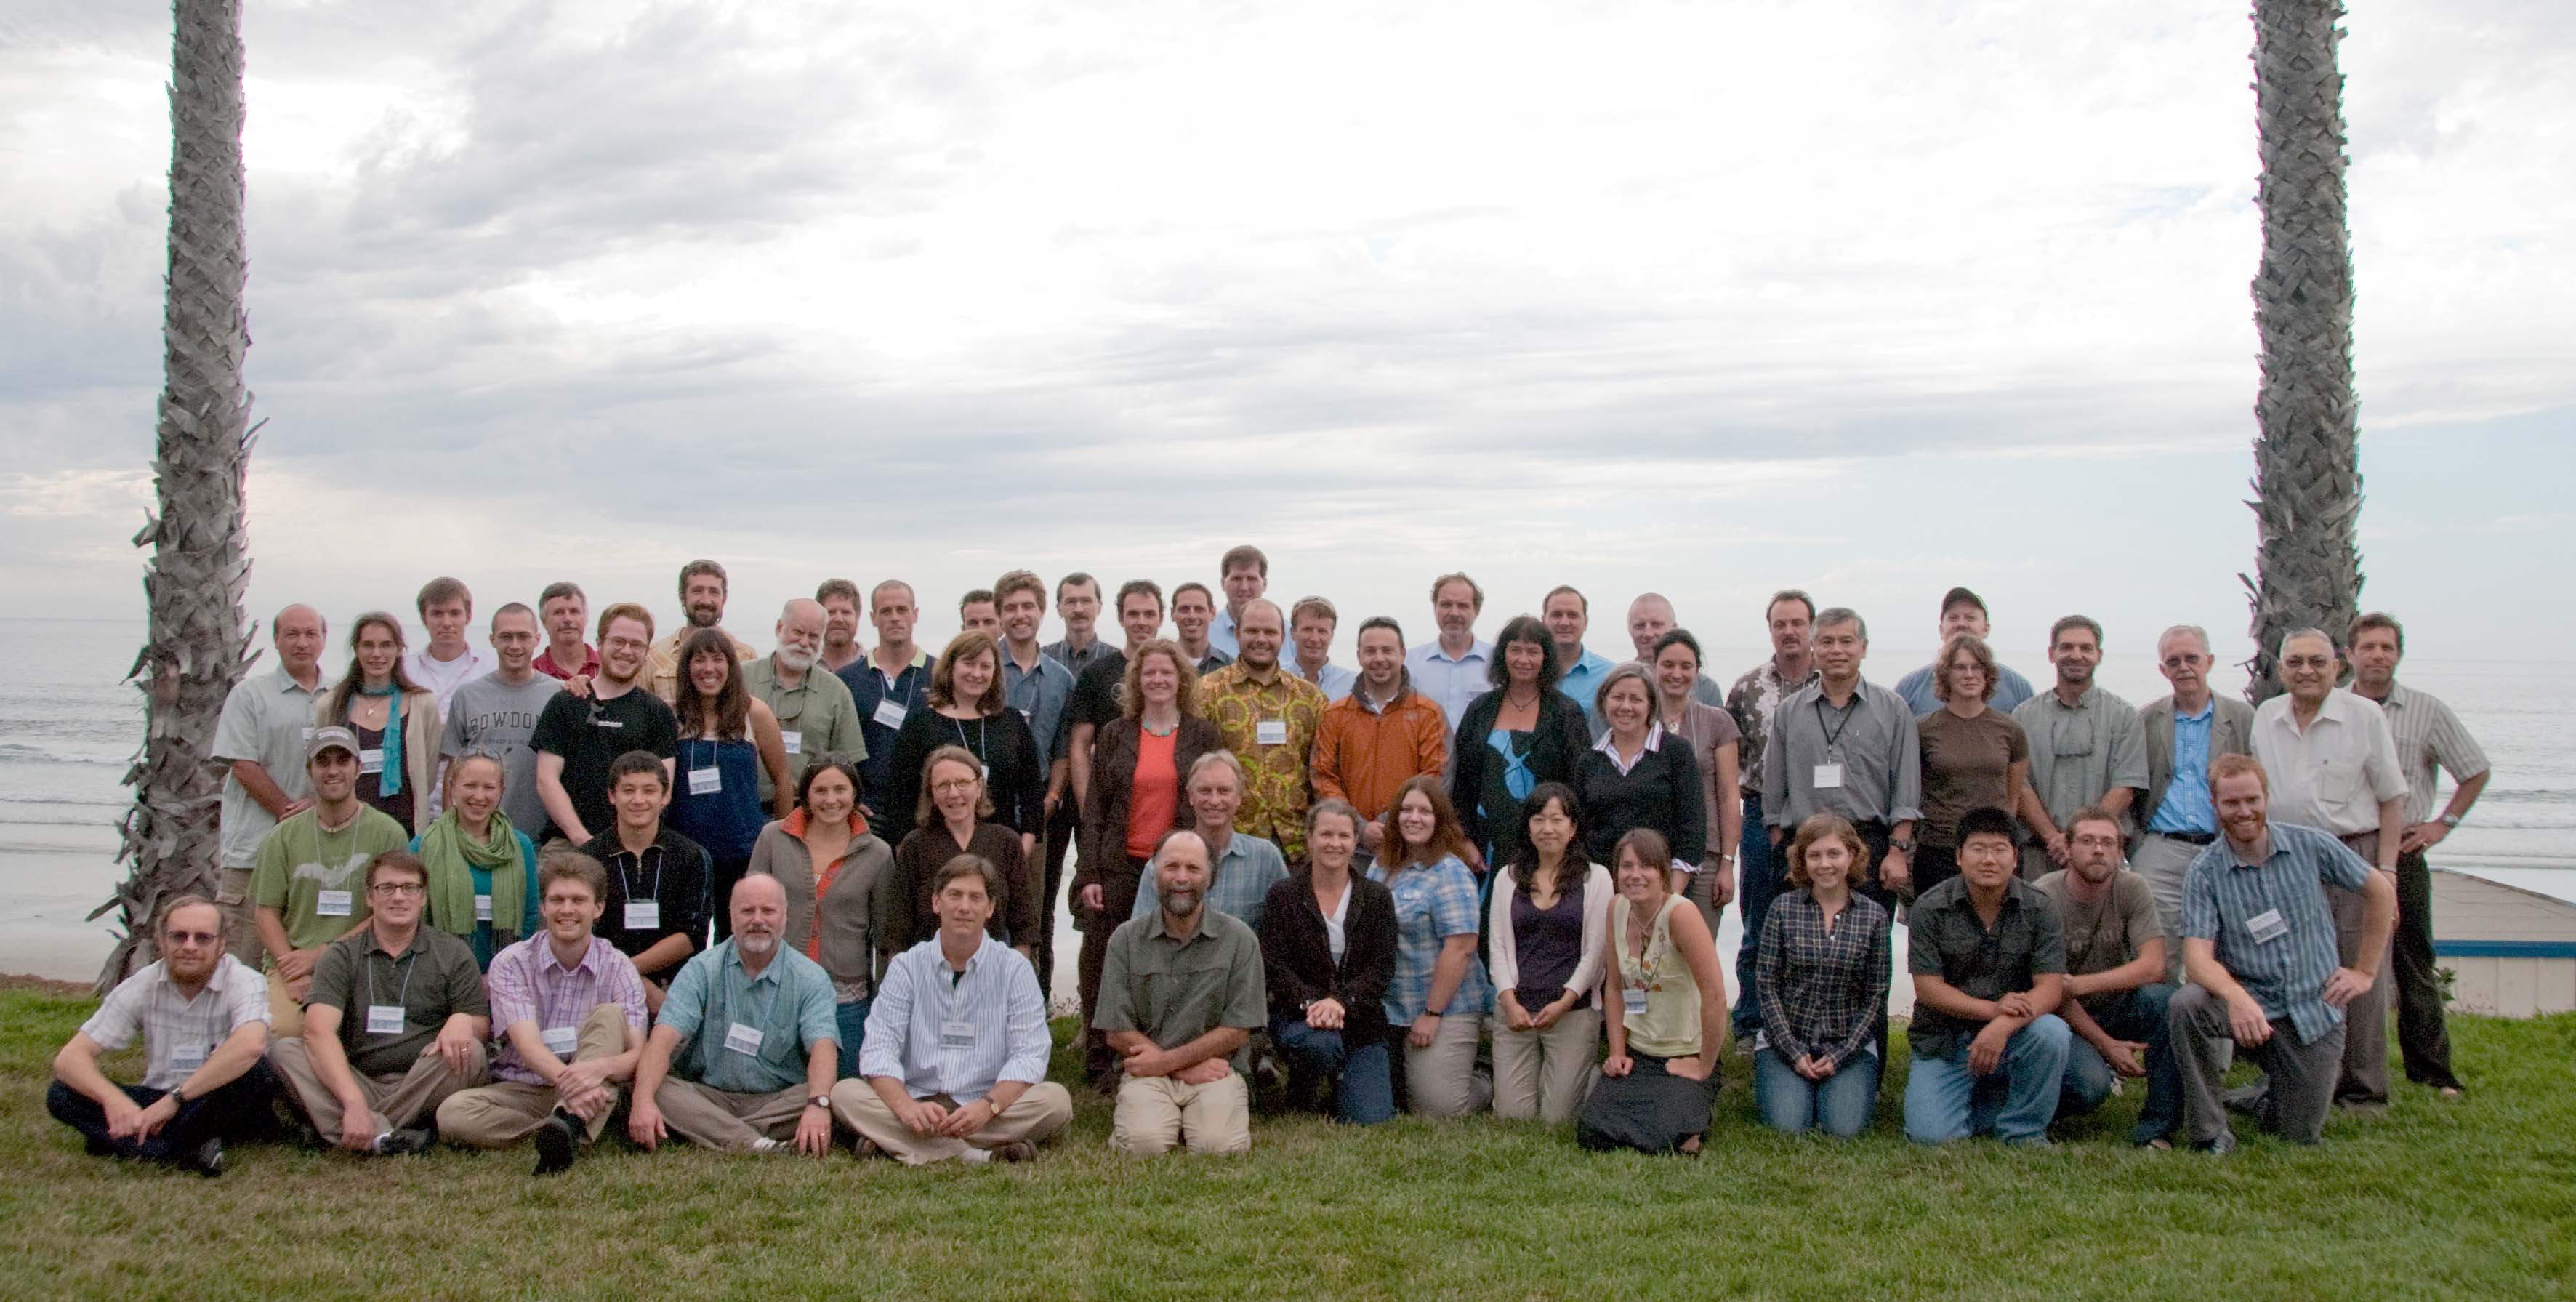 Participants of the 2009 WAIS Divide Science Meeting, held at Scripps Institution of Oceanography, La Jolla, CA from 1-2 October